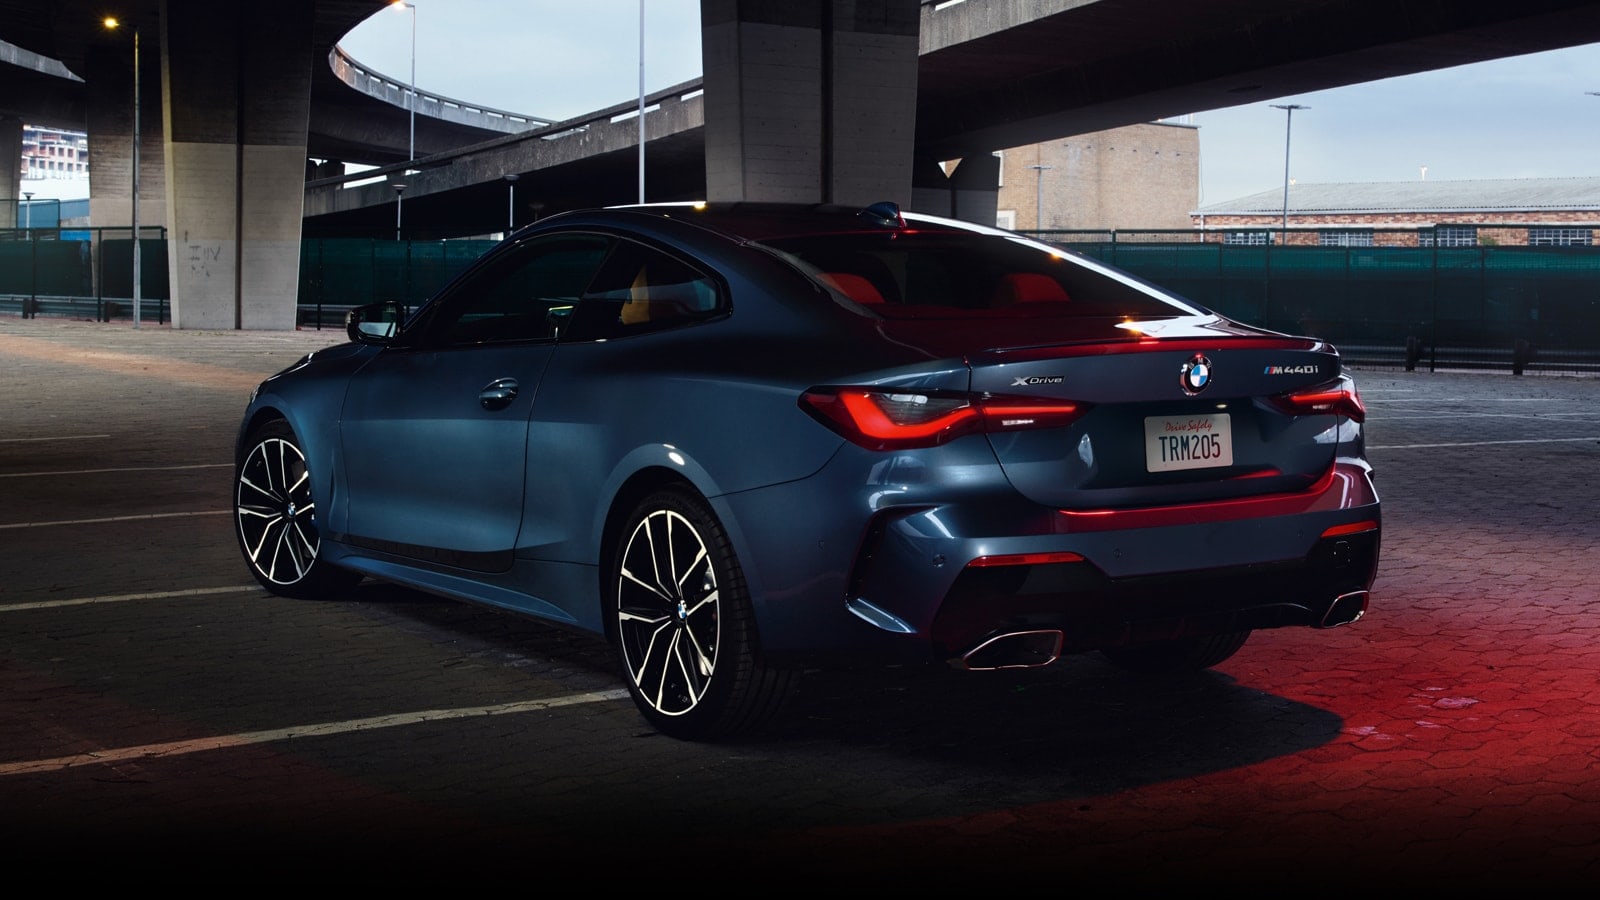 The 2021 BMW M440i xDrive Coupe captivates through the impressive rear diffuser and free-form dual exhaust finishers.